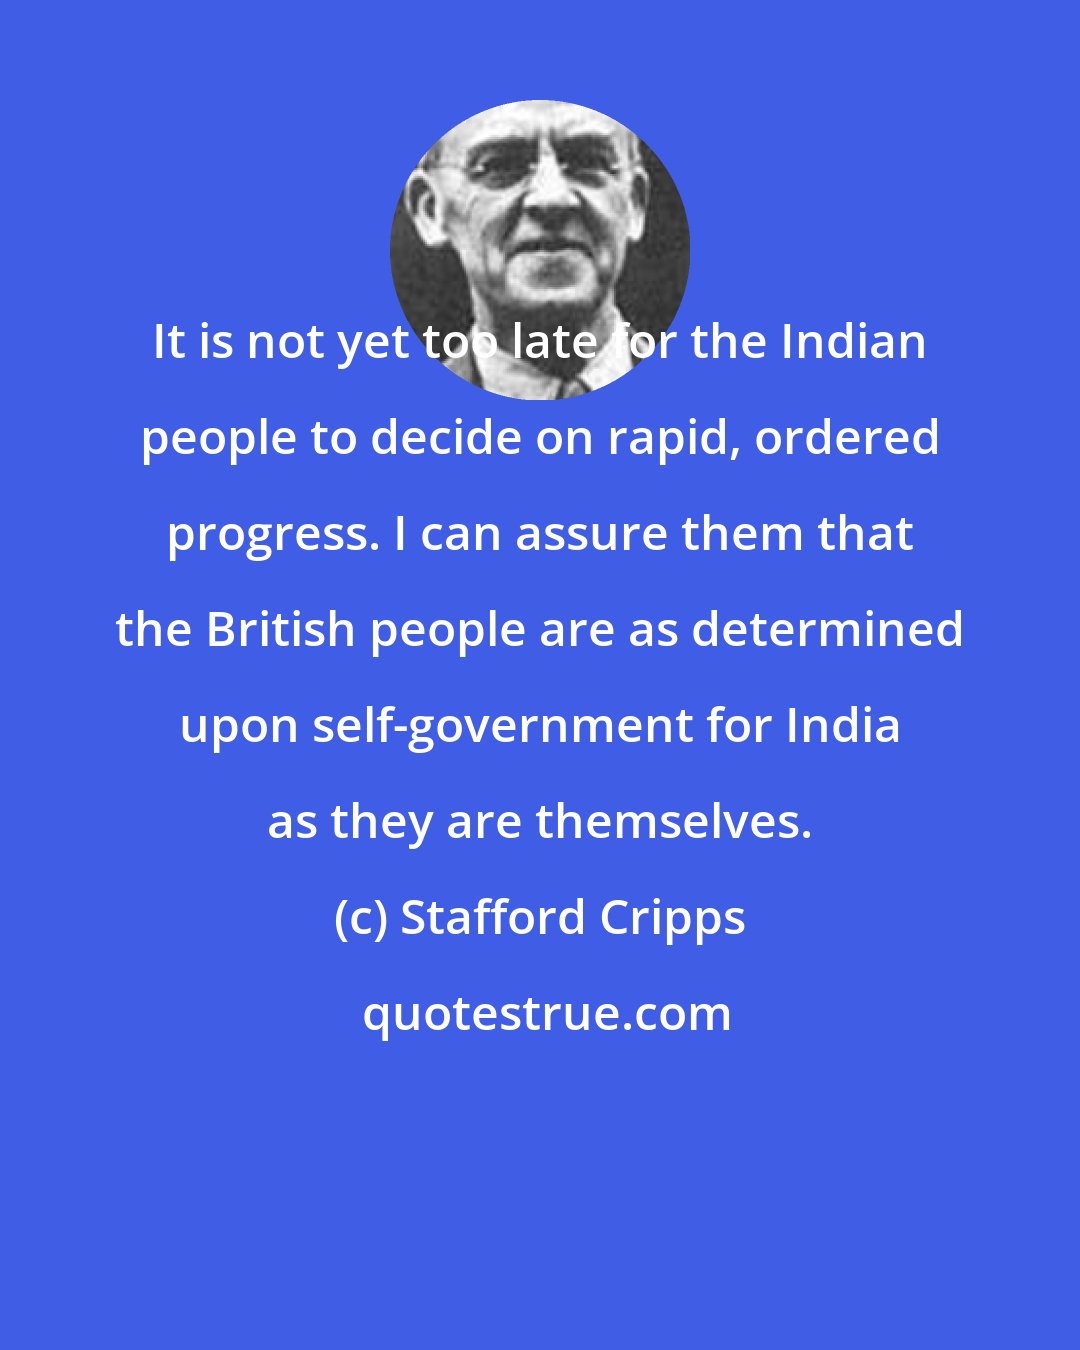 Stafford Cripps: It is not yet too late for the Indian people to decide on rapid, ordered progress. I can assure them that the British people are as determined upon self-government for India as they are themselves.